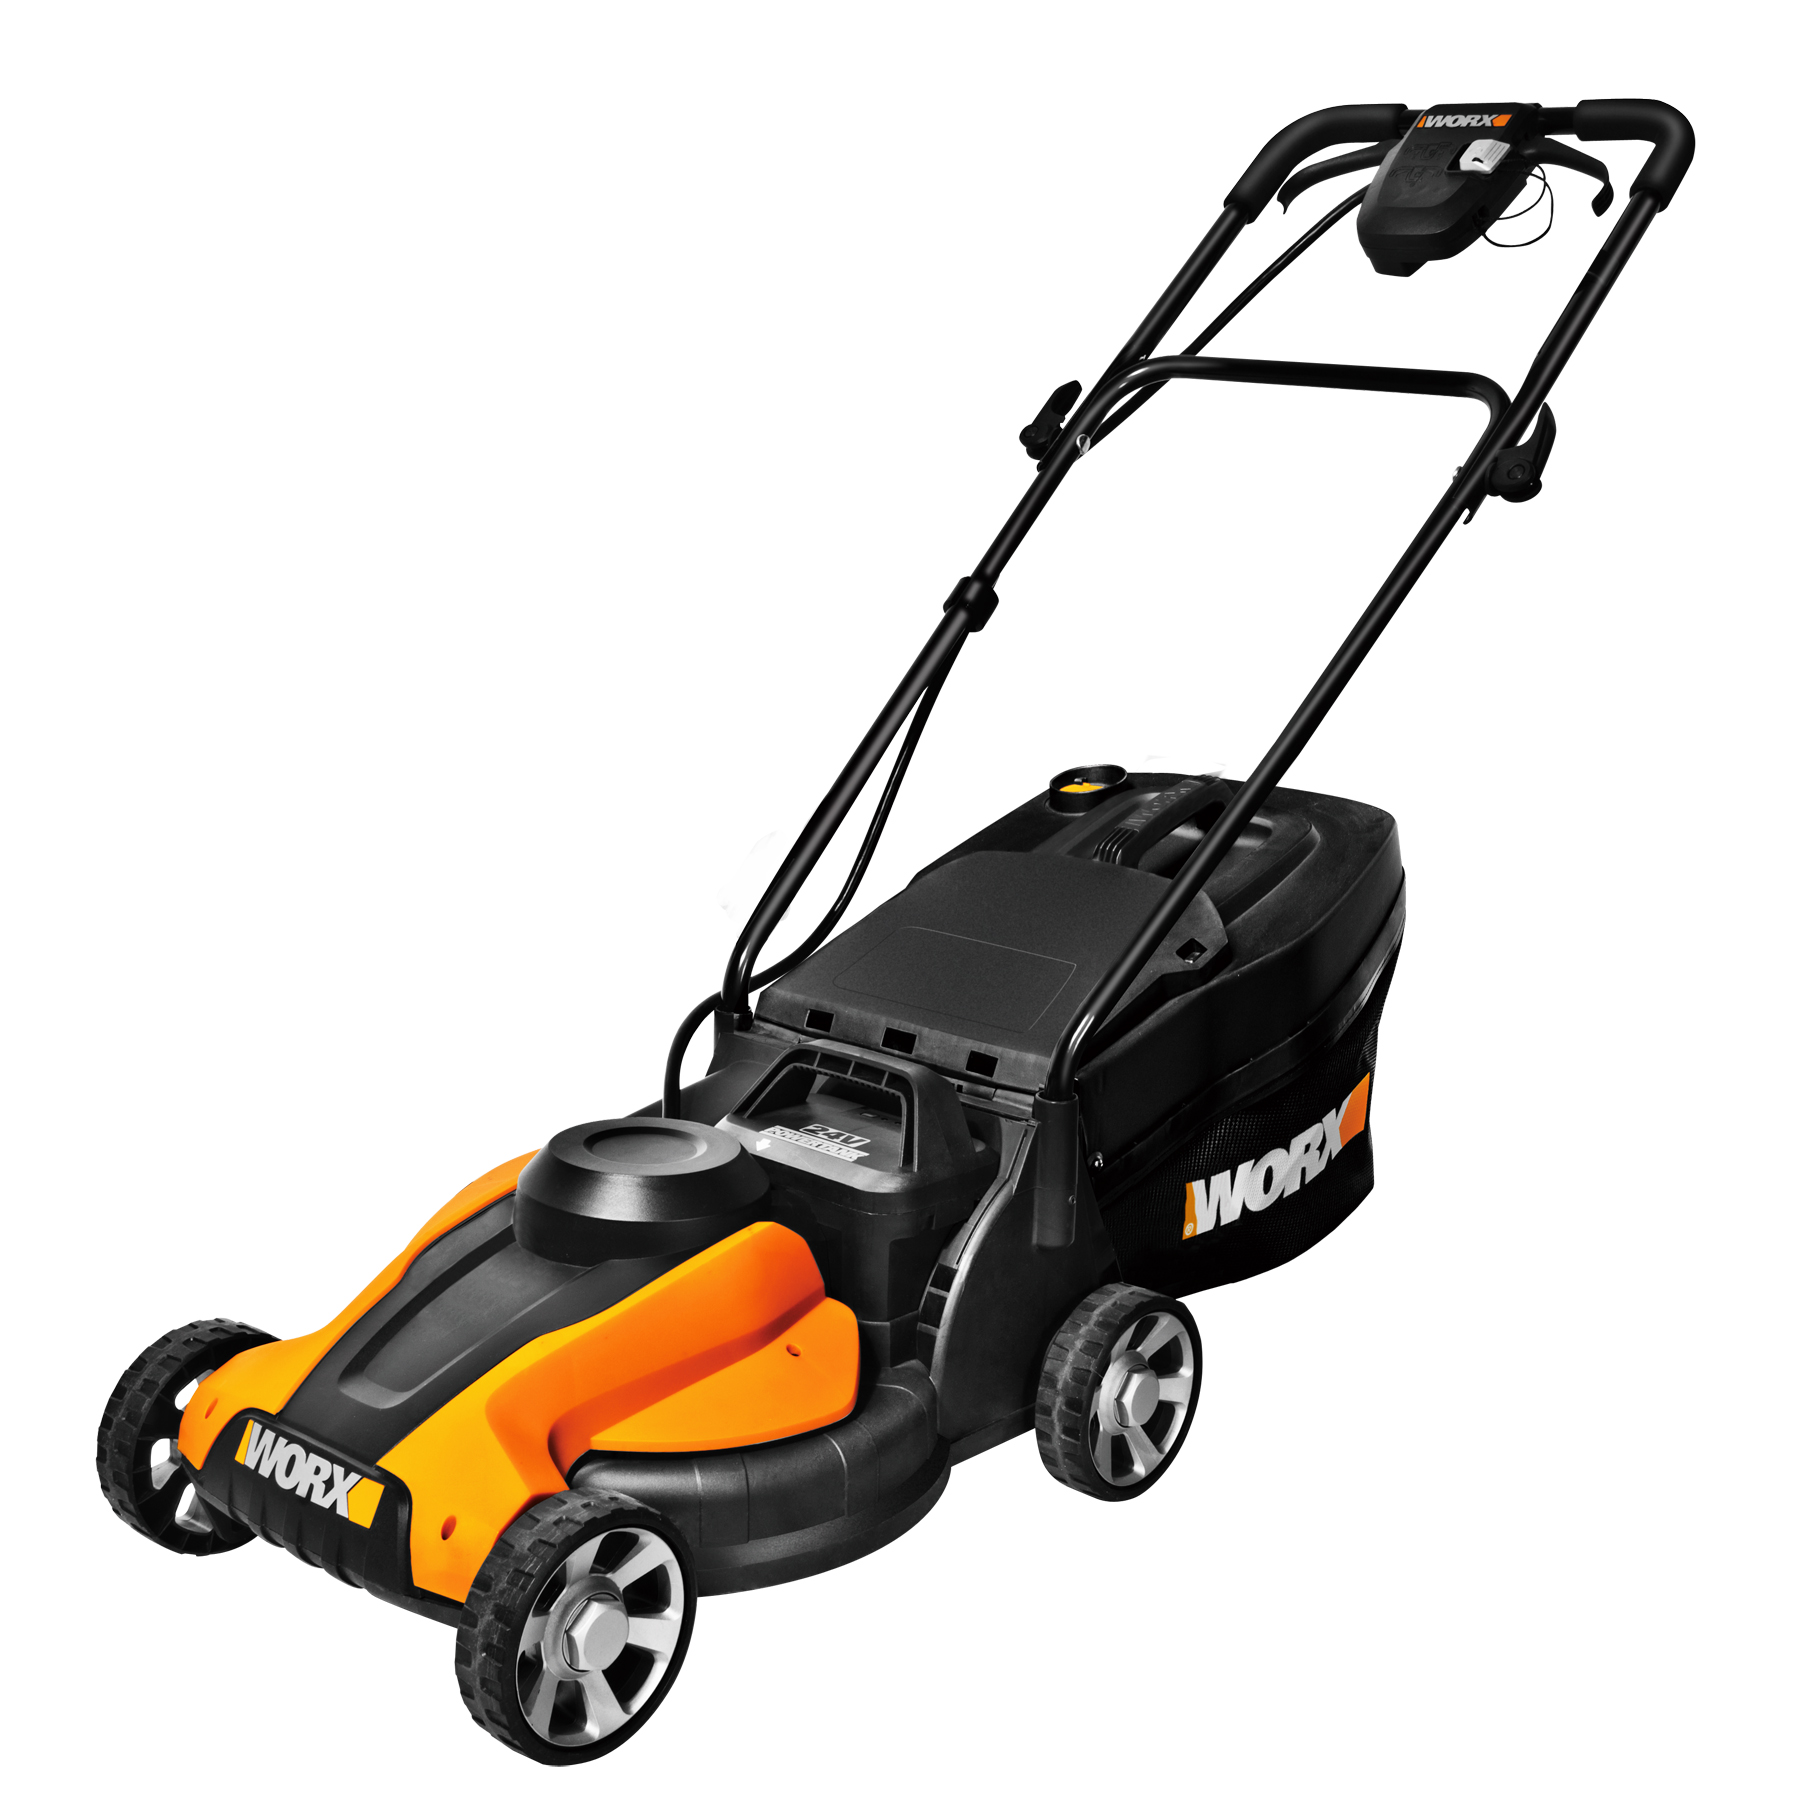 New WORX 14 in. Cordless Lawn Mower Is Efficient, Lightweight and Easy